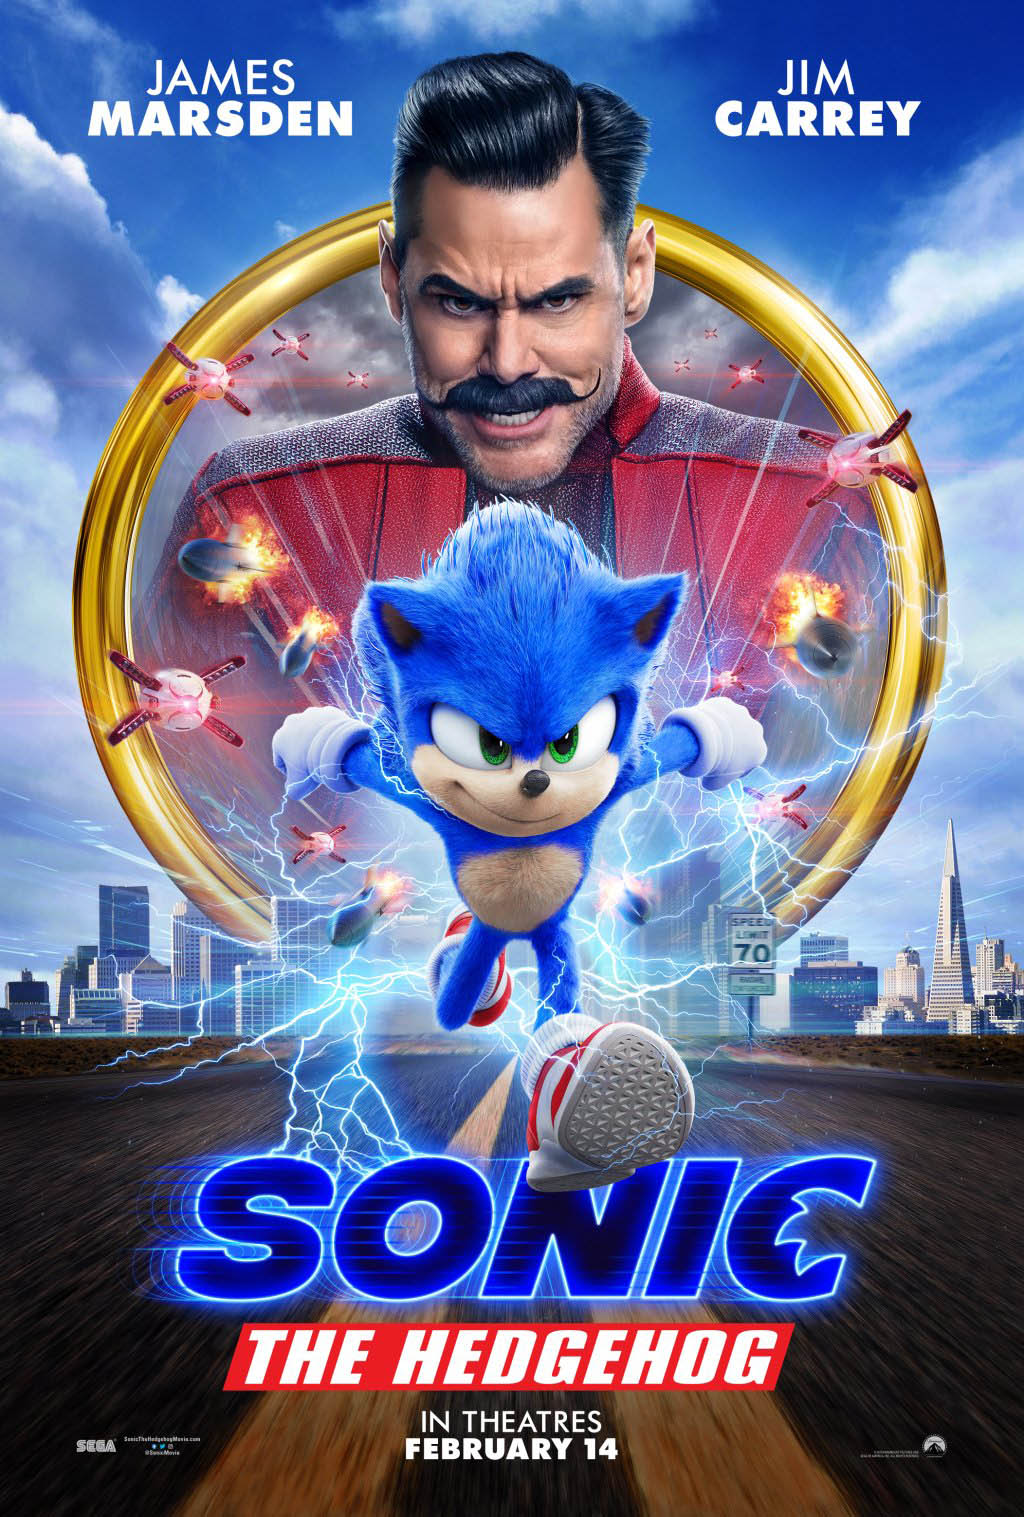 Sonic the Hedgehog (2019) magnificent amusement Full Movie Free Online